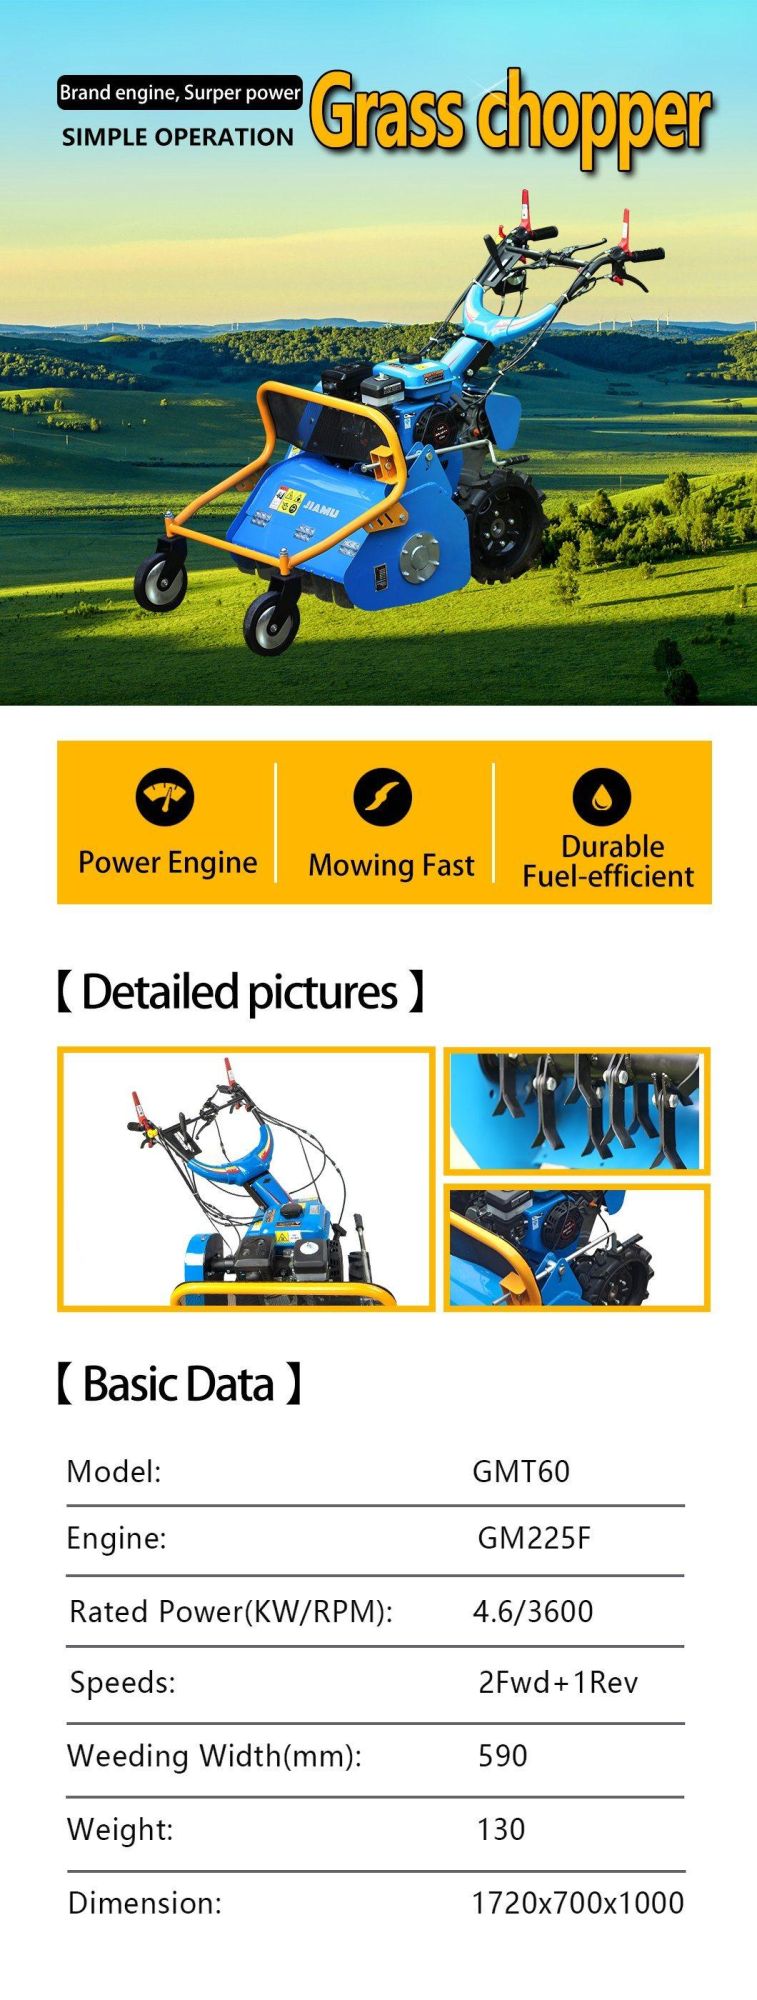 Jiamu 225cc Gasoline Engine Gmt60 Lawn Mower Agricultural Machinery with CE Euro V